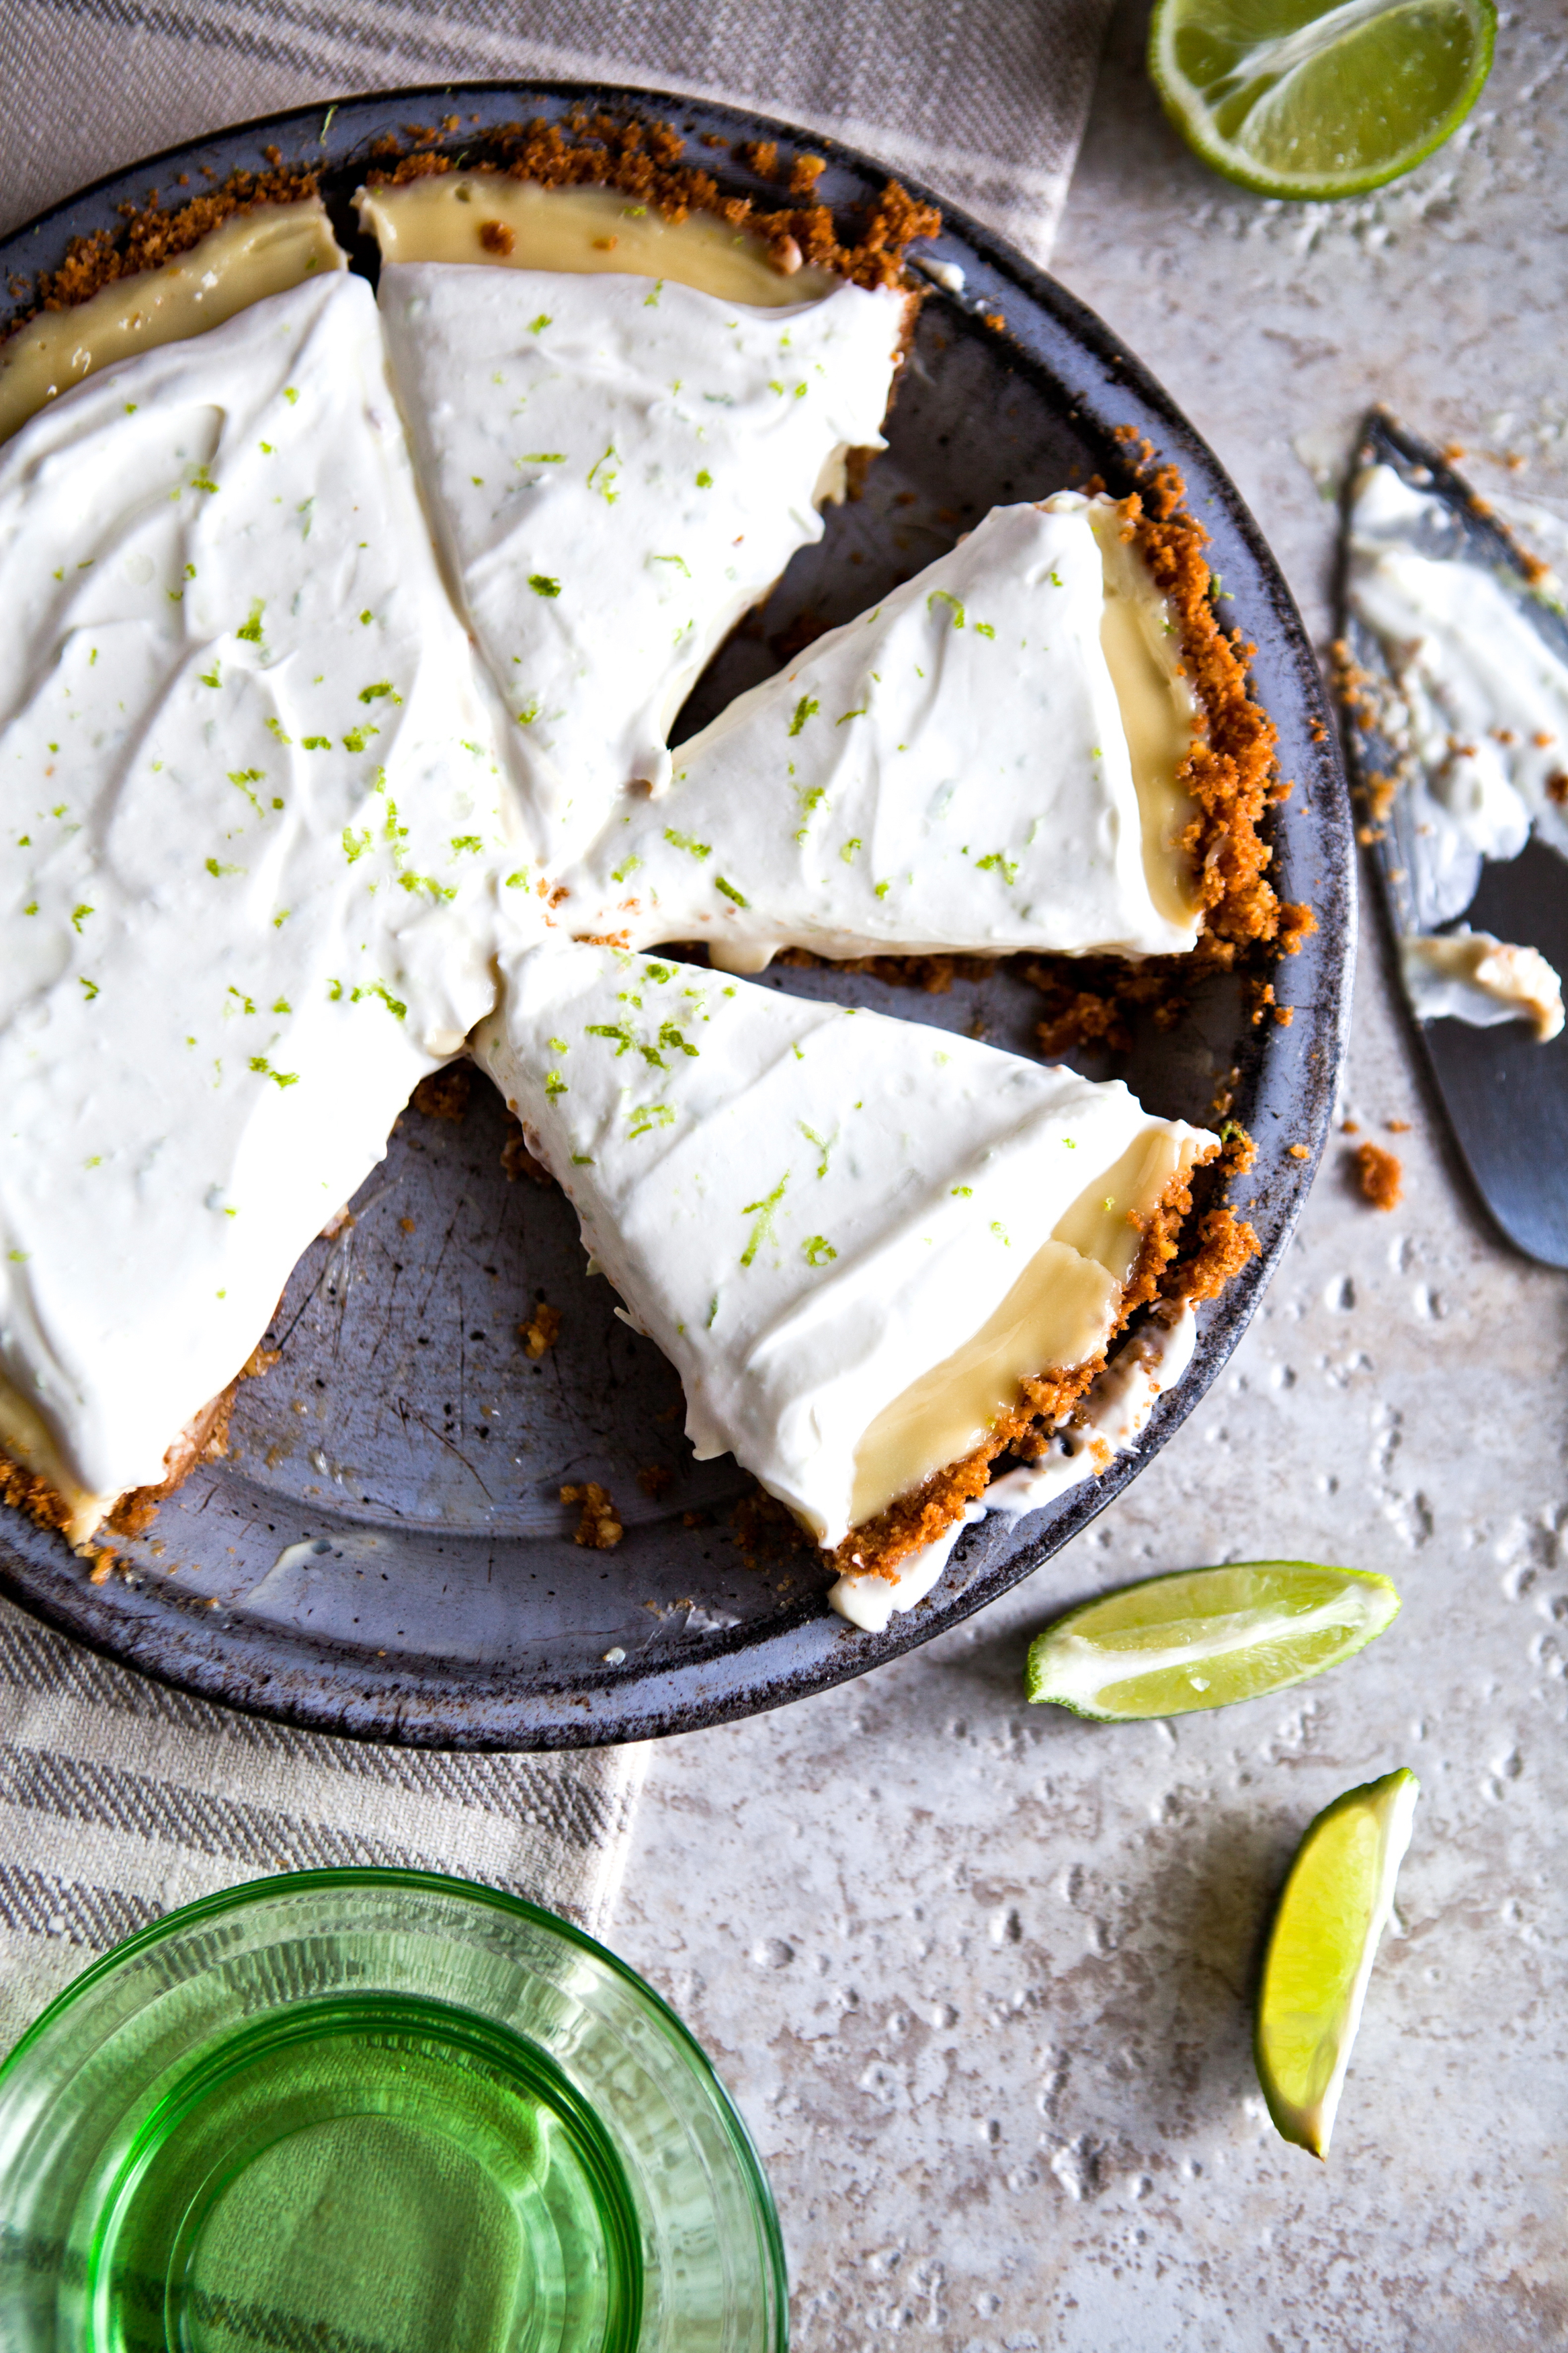 Featured image for “Key Lime Pie: A Mouthful of Stars”